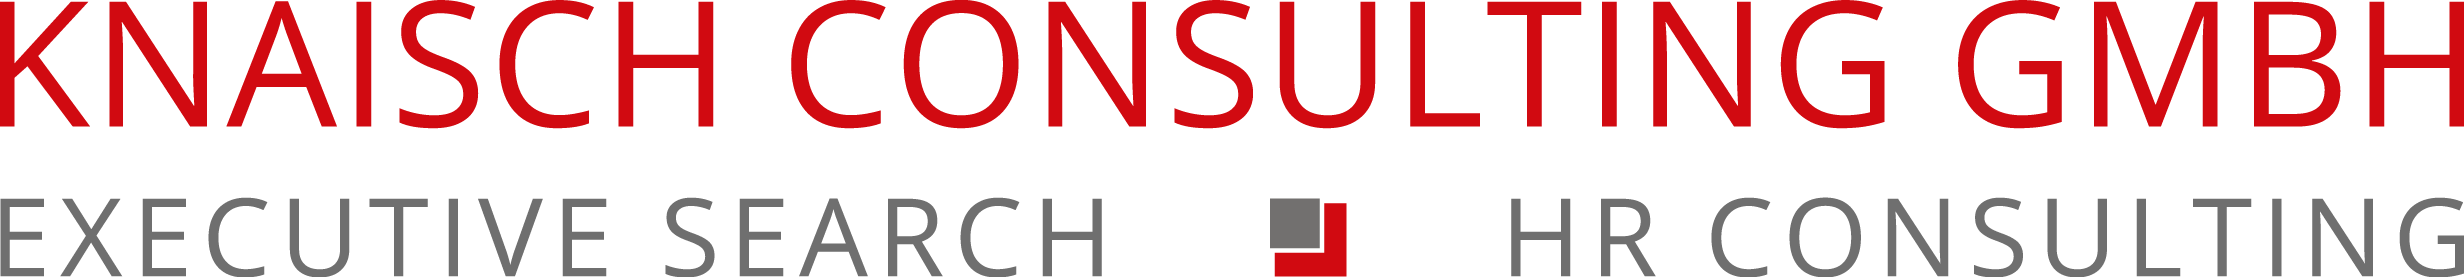 Head (f/m/d) of Innovation and Technology - über Knaisch Consulting GmbH - KNAISCH CONSULTING GMBH - Logo